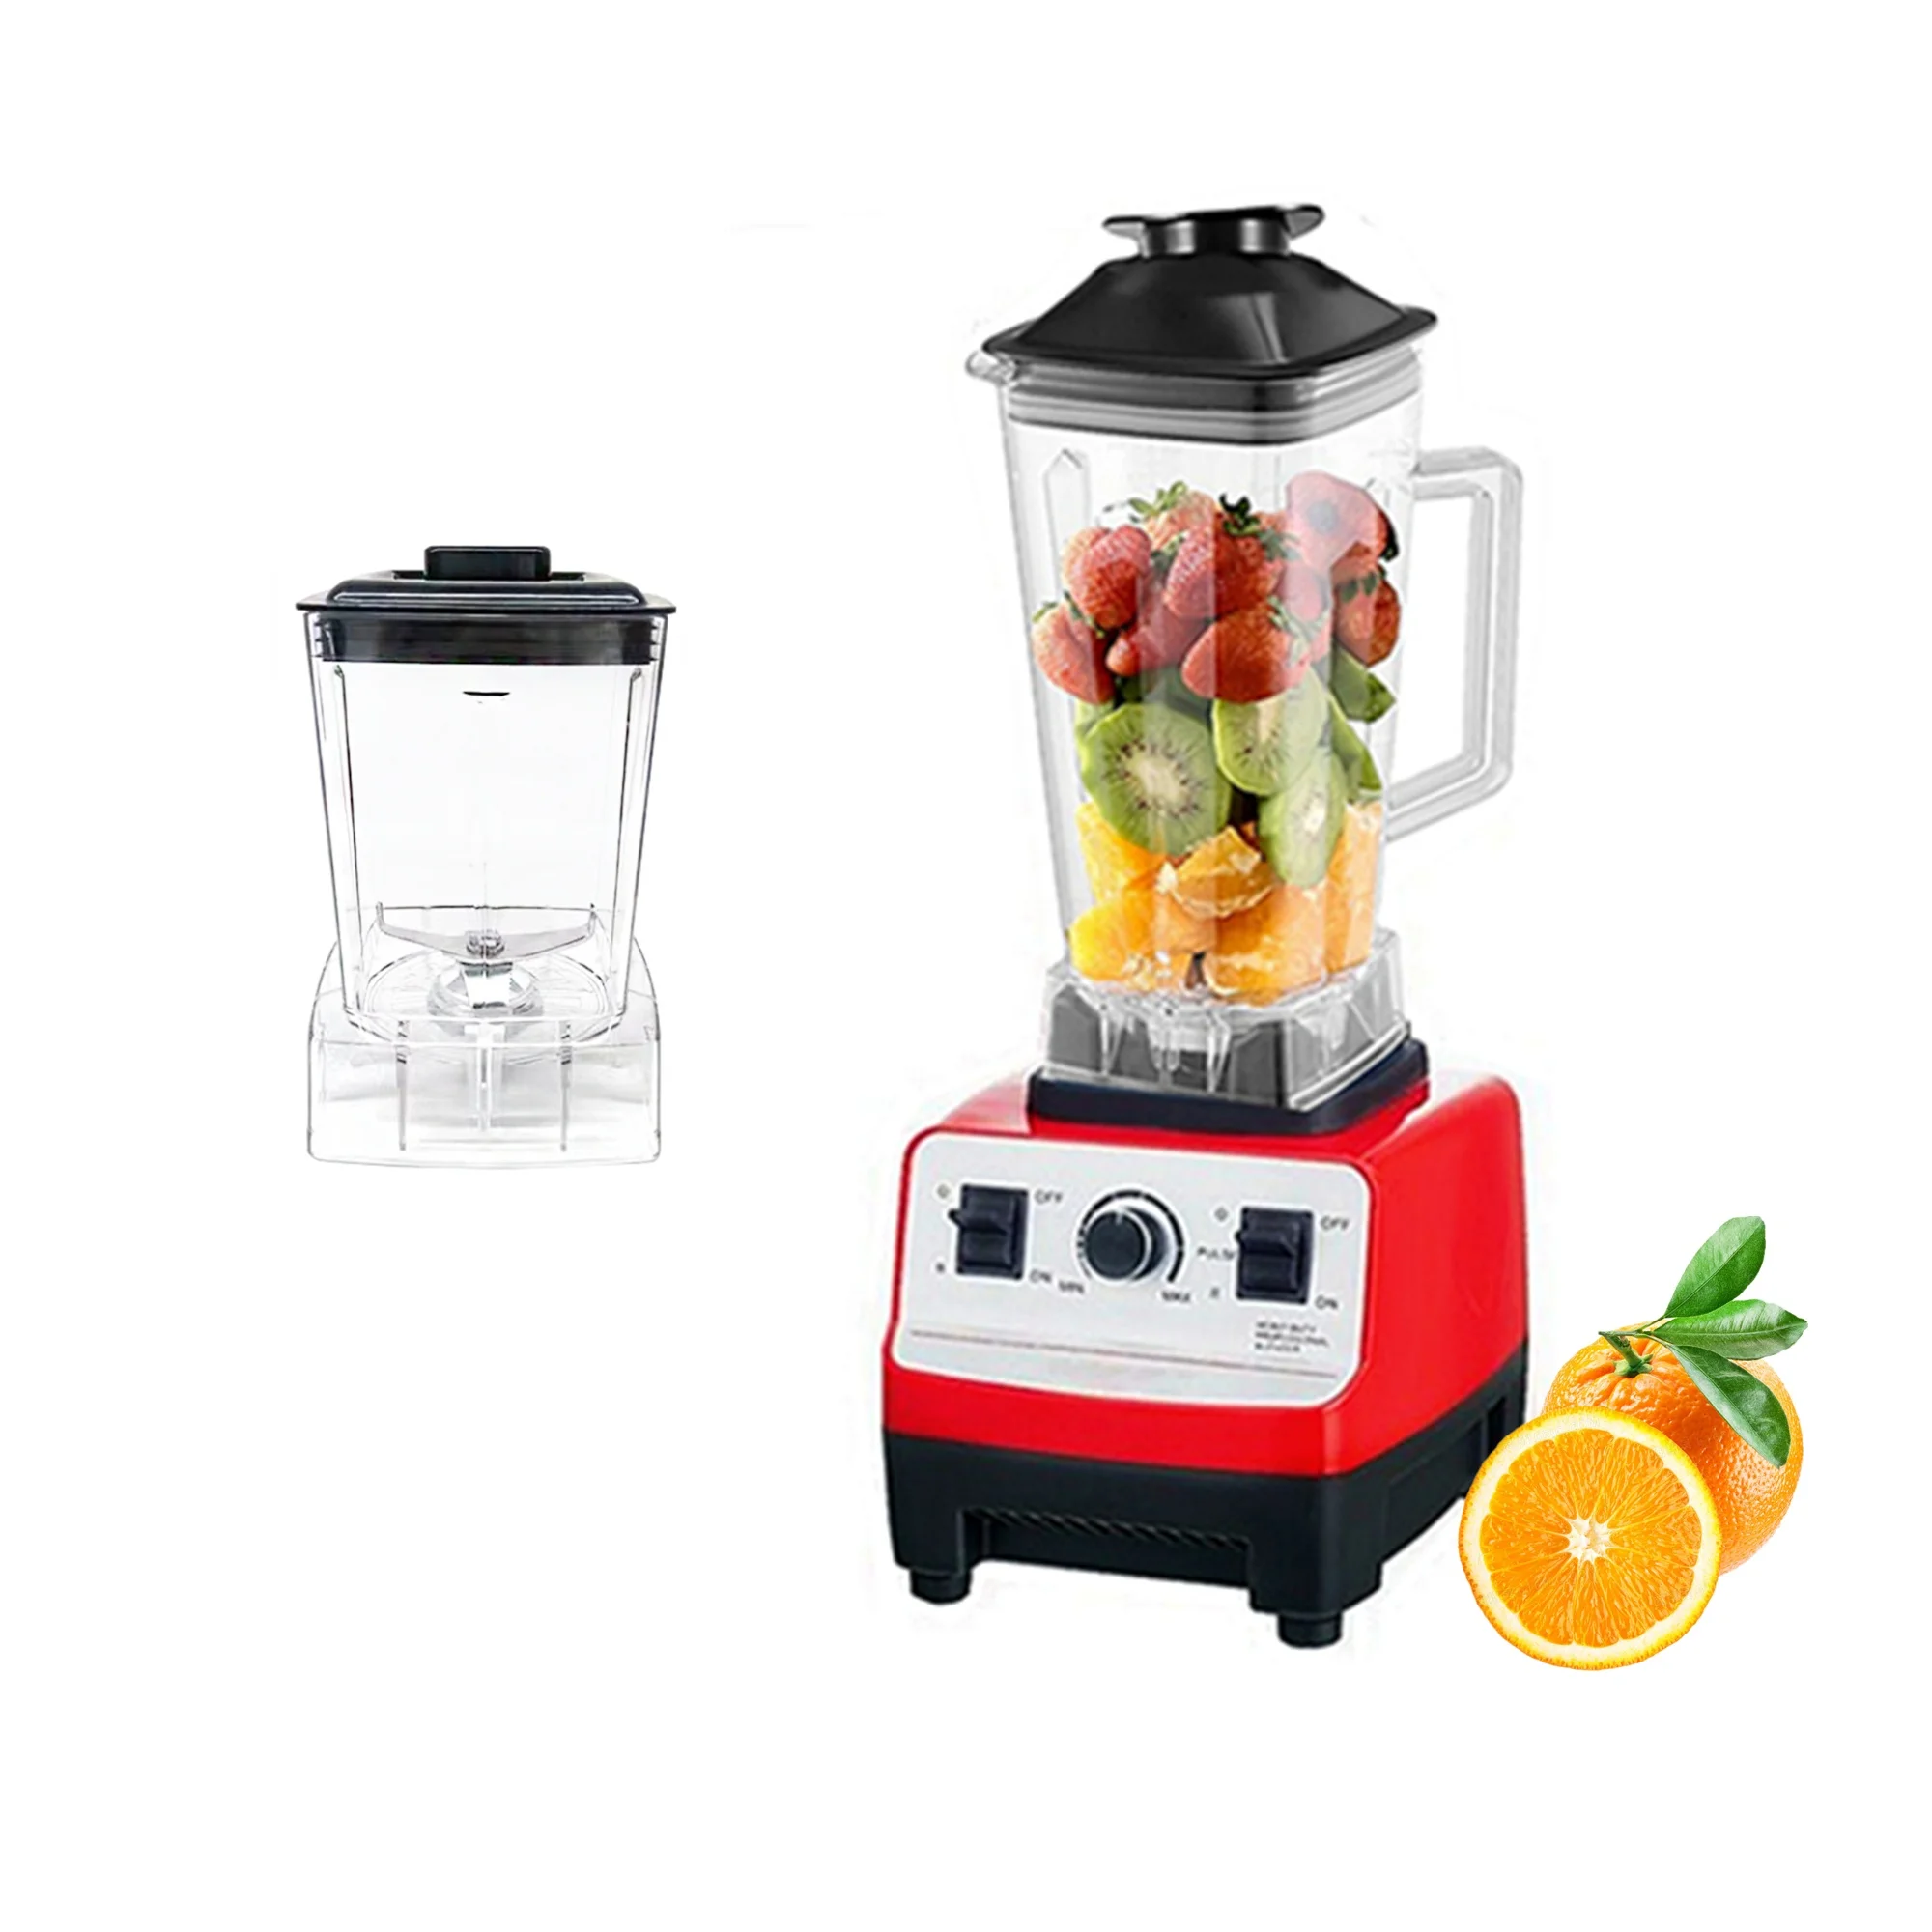 Wholesale Silver Crest Blender Smoothies Maker Commercial Blender Electric Plastic 5500W Large Power 2 in 1 Multifunctional OEM 16 Two Cup m.alibaba.com